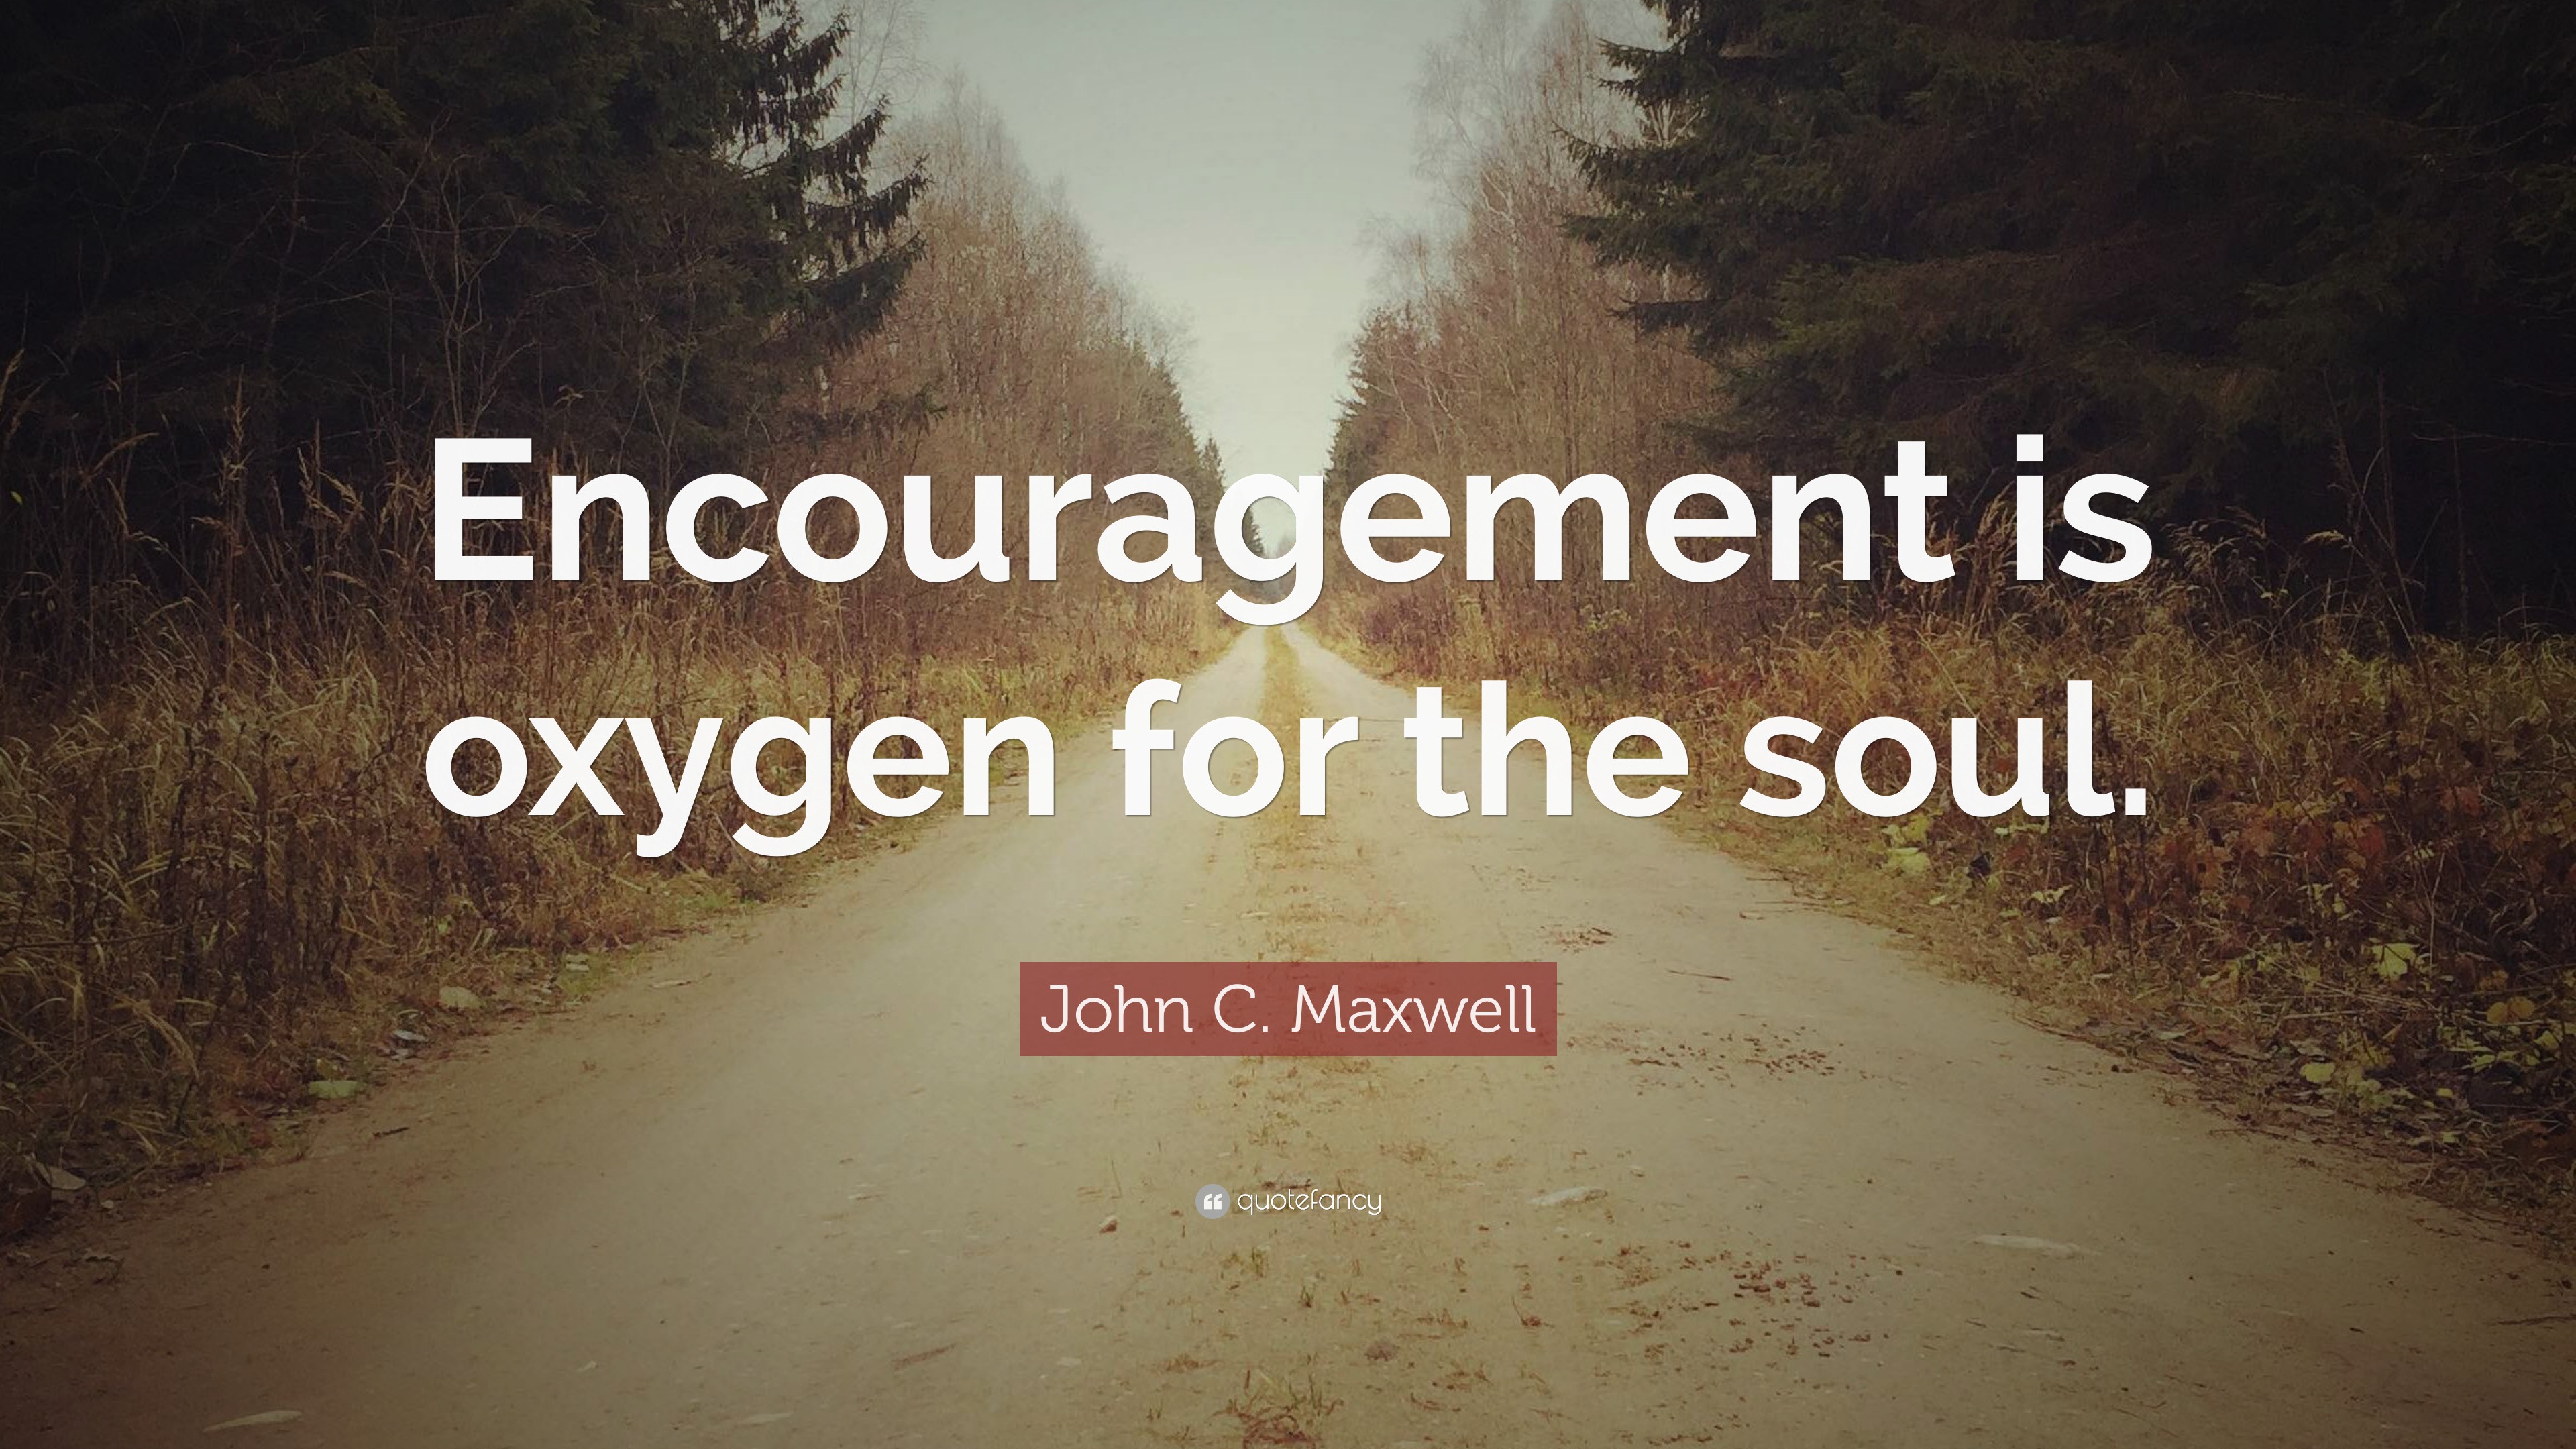 John C. Maxwell Quote: “Encouragement is oxygen for the soul.”